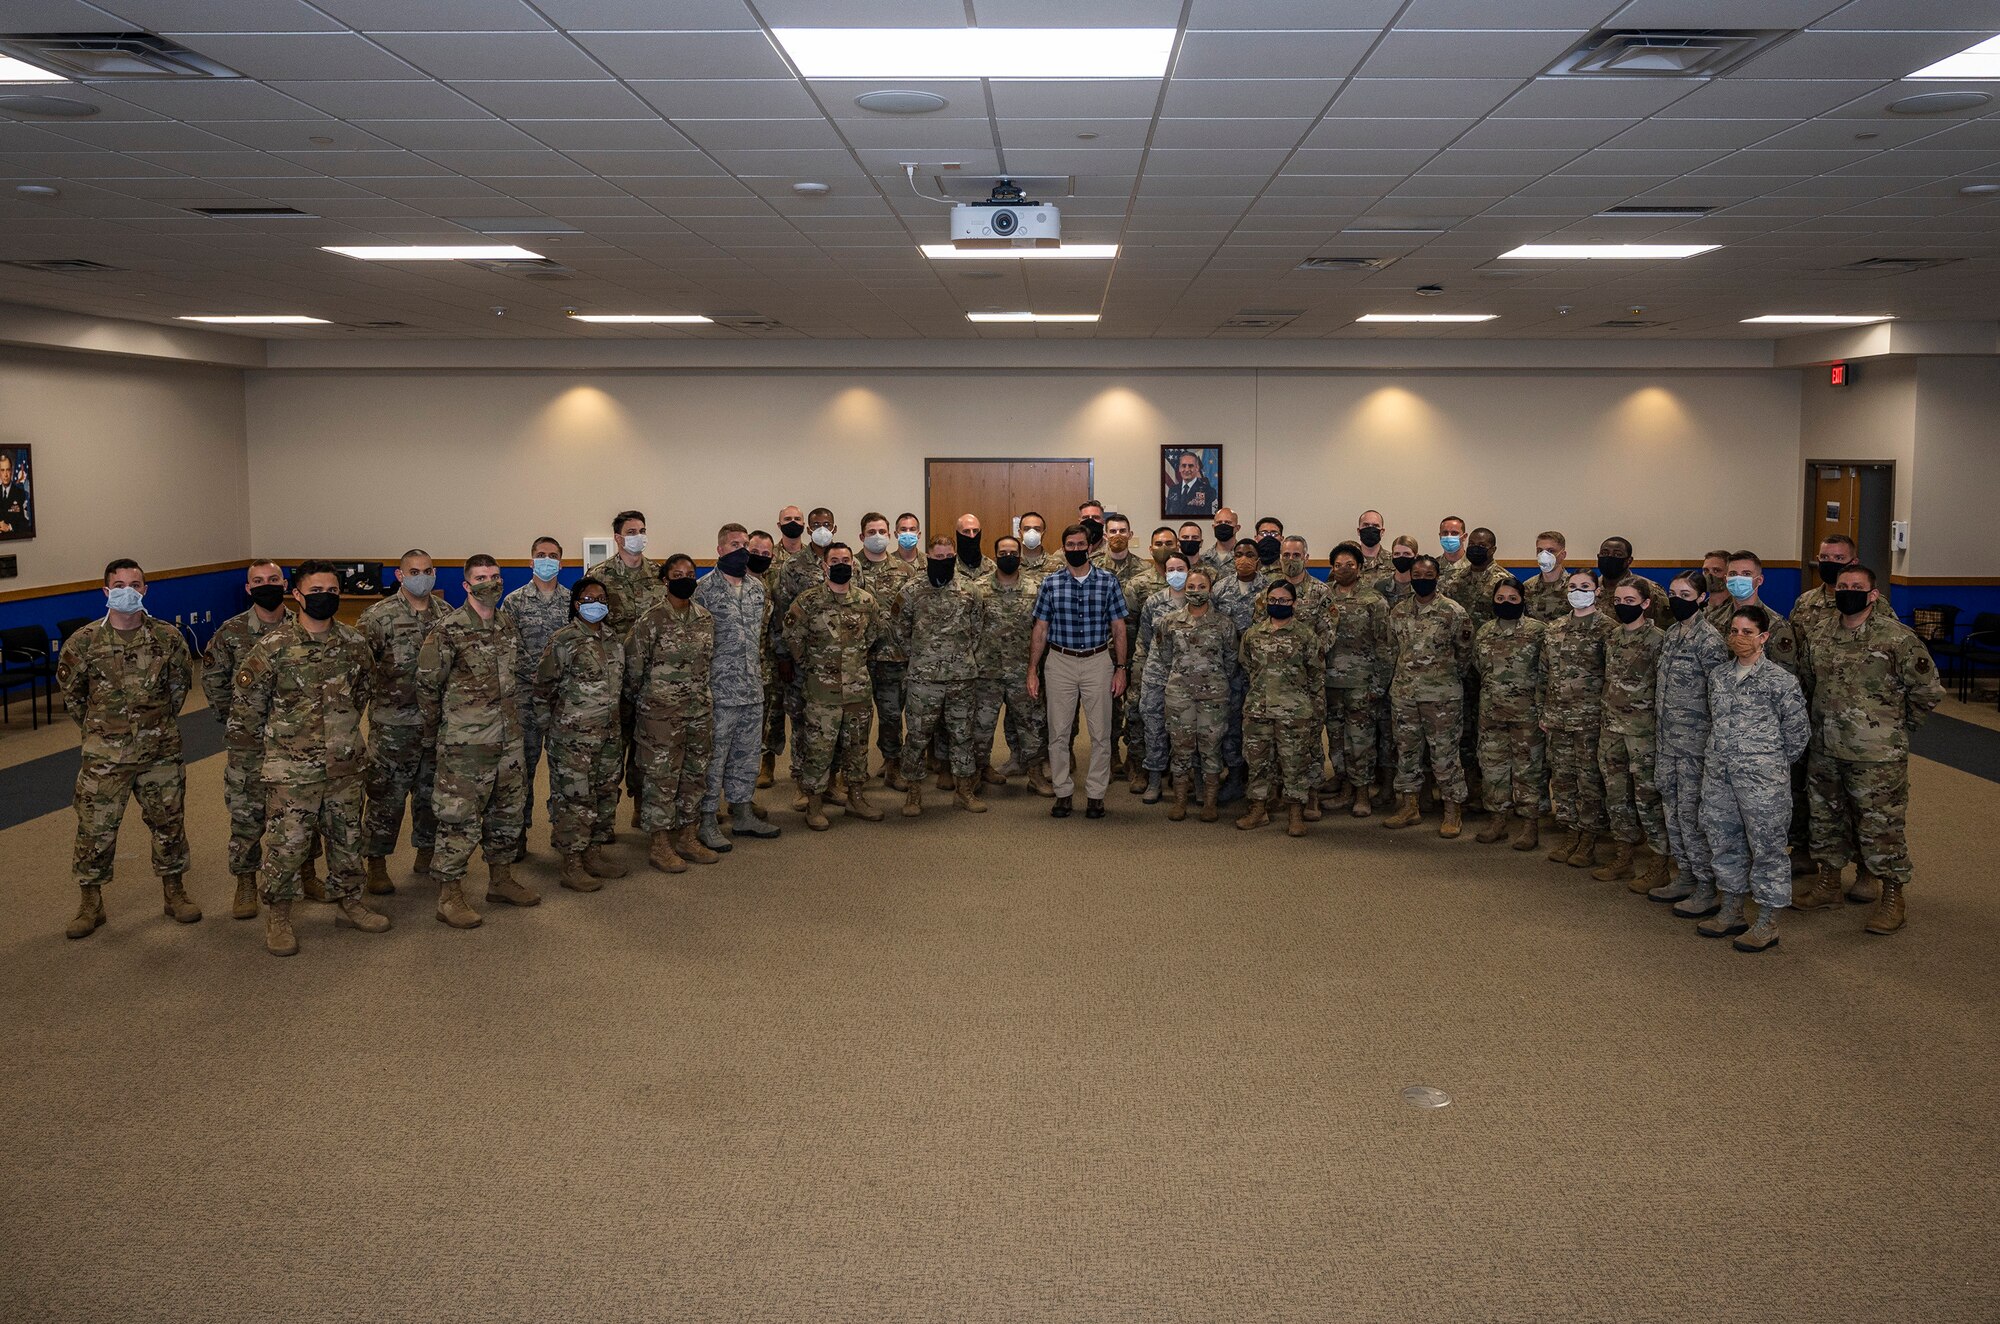 U.S. Secretary of Defense Dr. Mark T. Esper poses for a group photo with JBSA airmen after administering the oath of enlistment during his visit June 16, 2020, at Joint Base San Antonio-Lackland, Texas. Esper met with AETC leaders to see firsthand how Basic Military Training is fighting through COVID-19 with health protection measures in place and adapting operations to current Centers for Disease Control and Prevention Guidance. The visit also allowed him to witness how a citizen becomes an Airman during COVID-19.